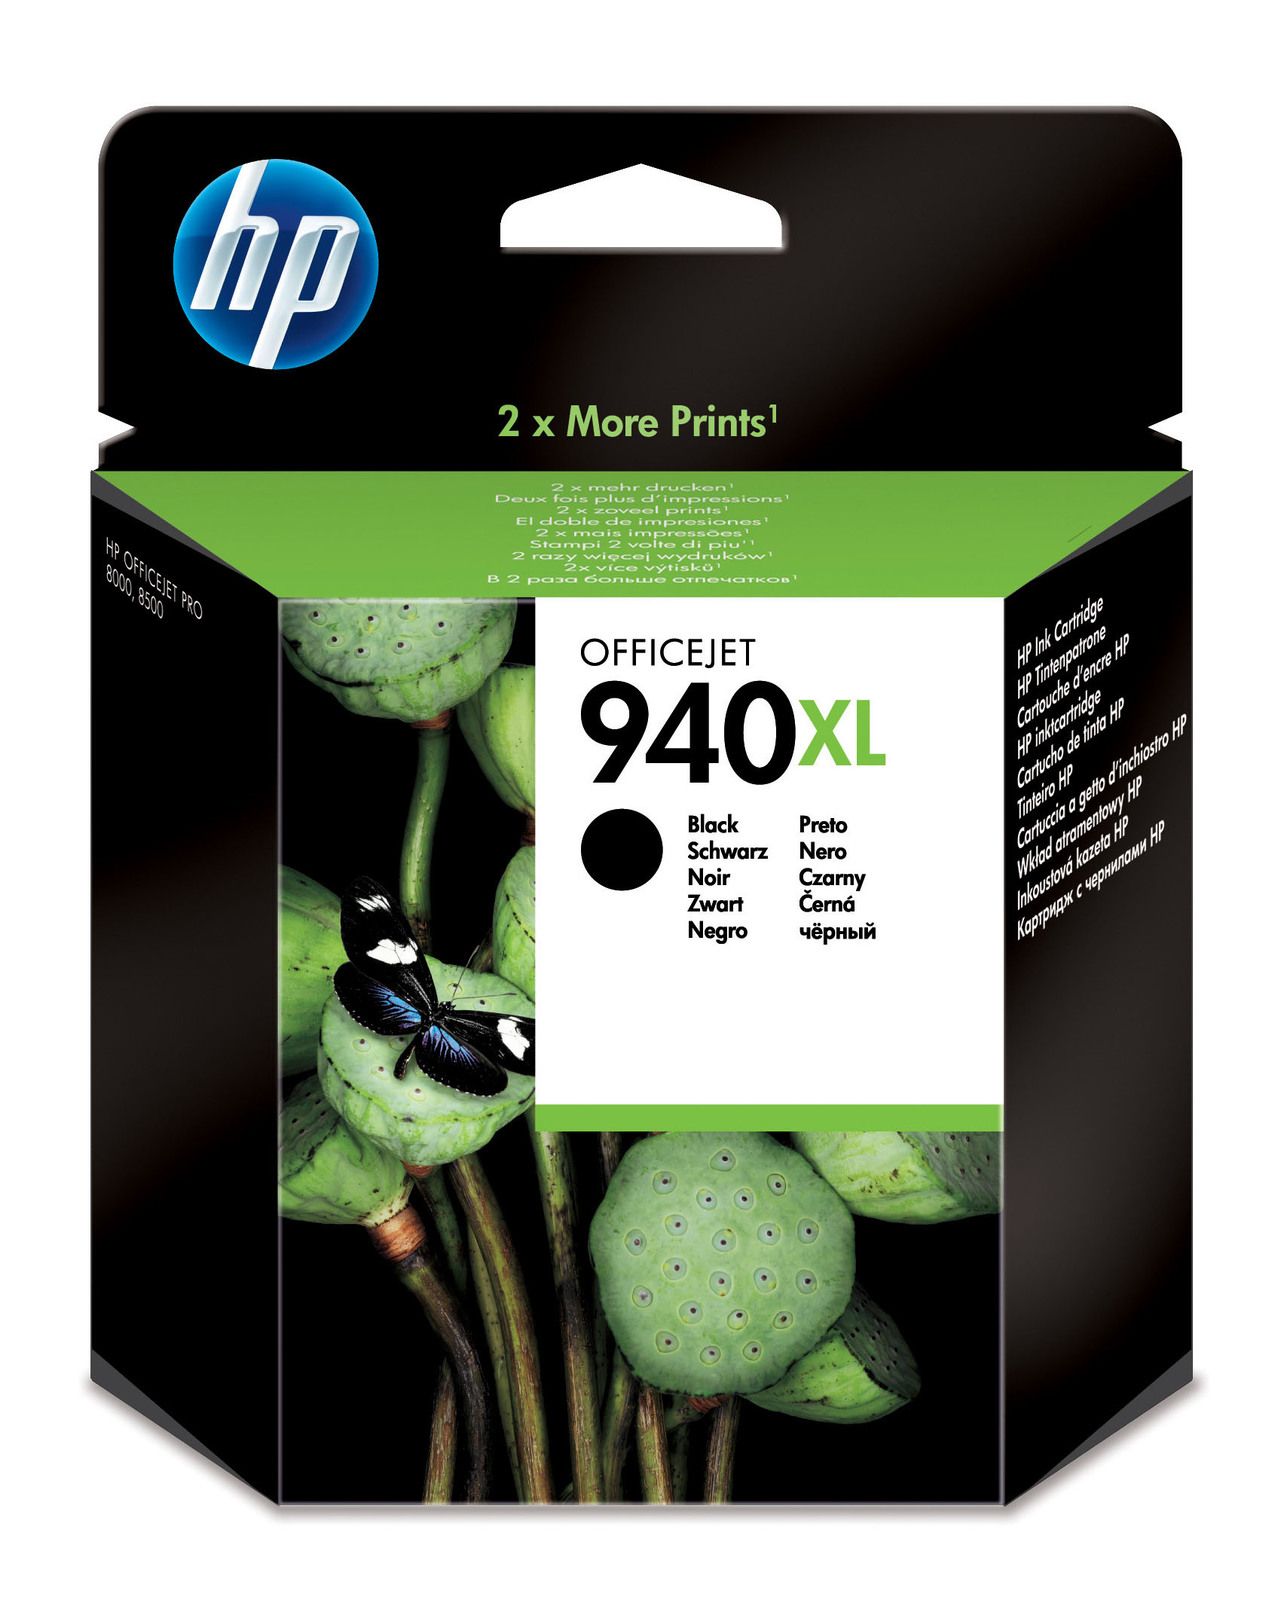 Related to HP CB092A Cartridges: C4906AE